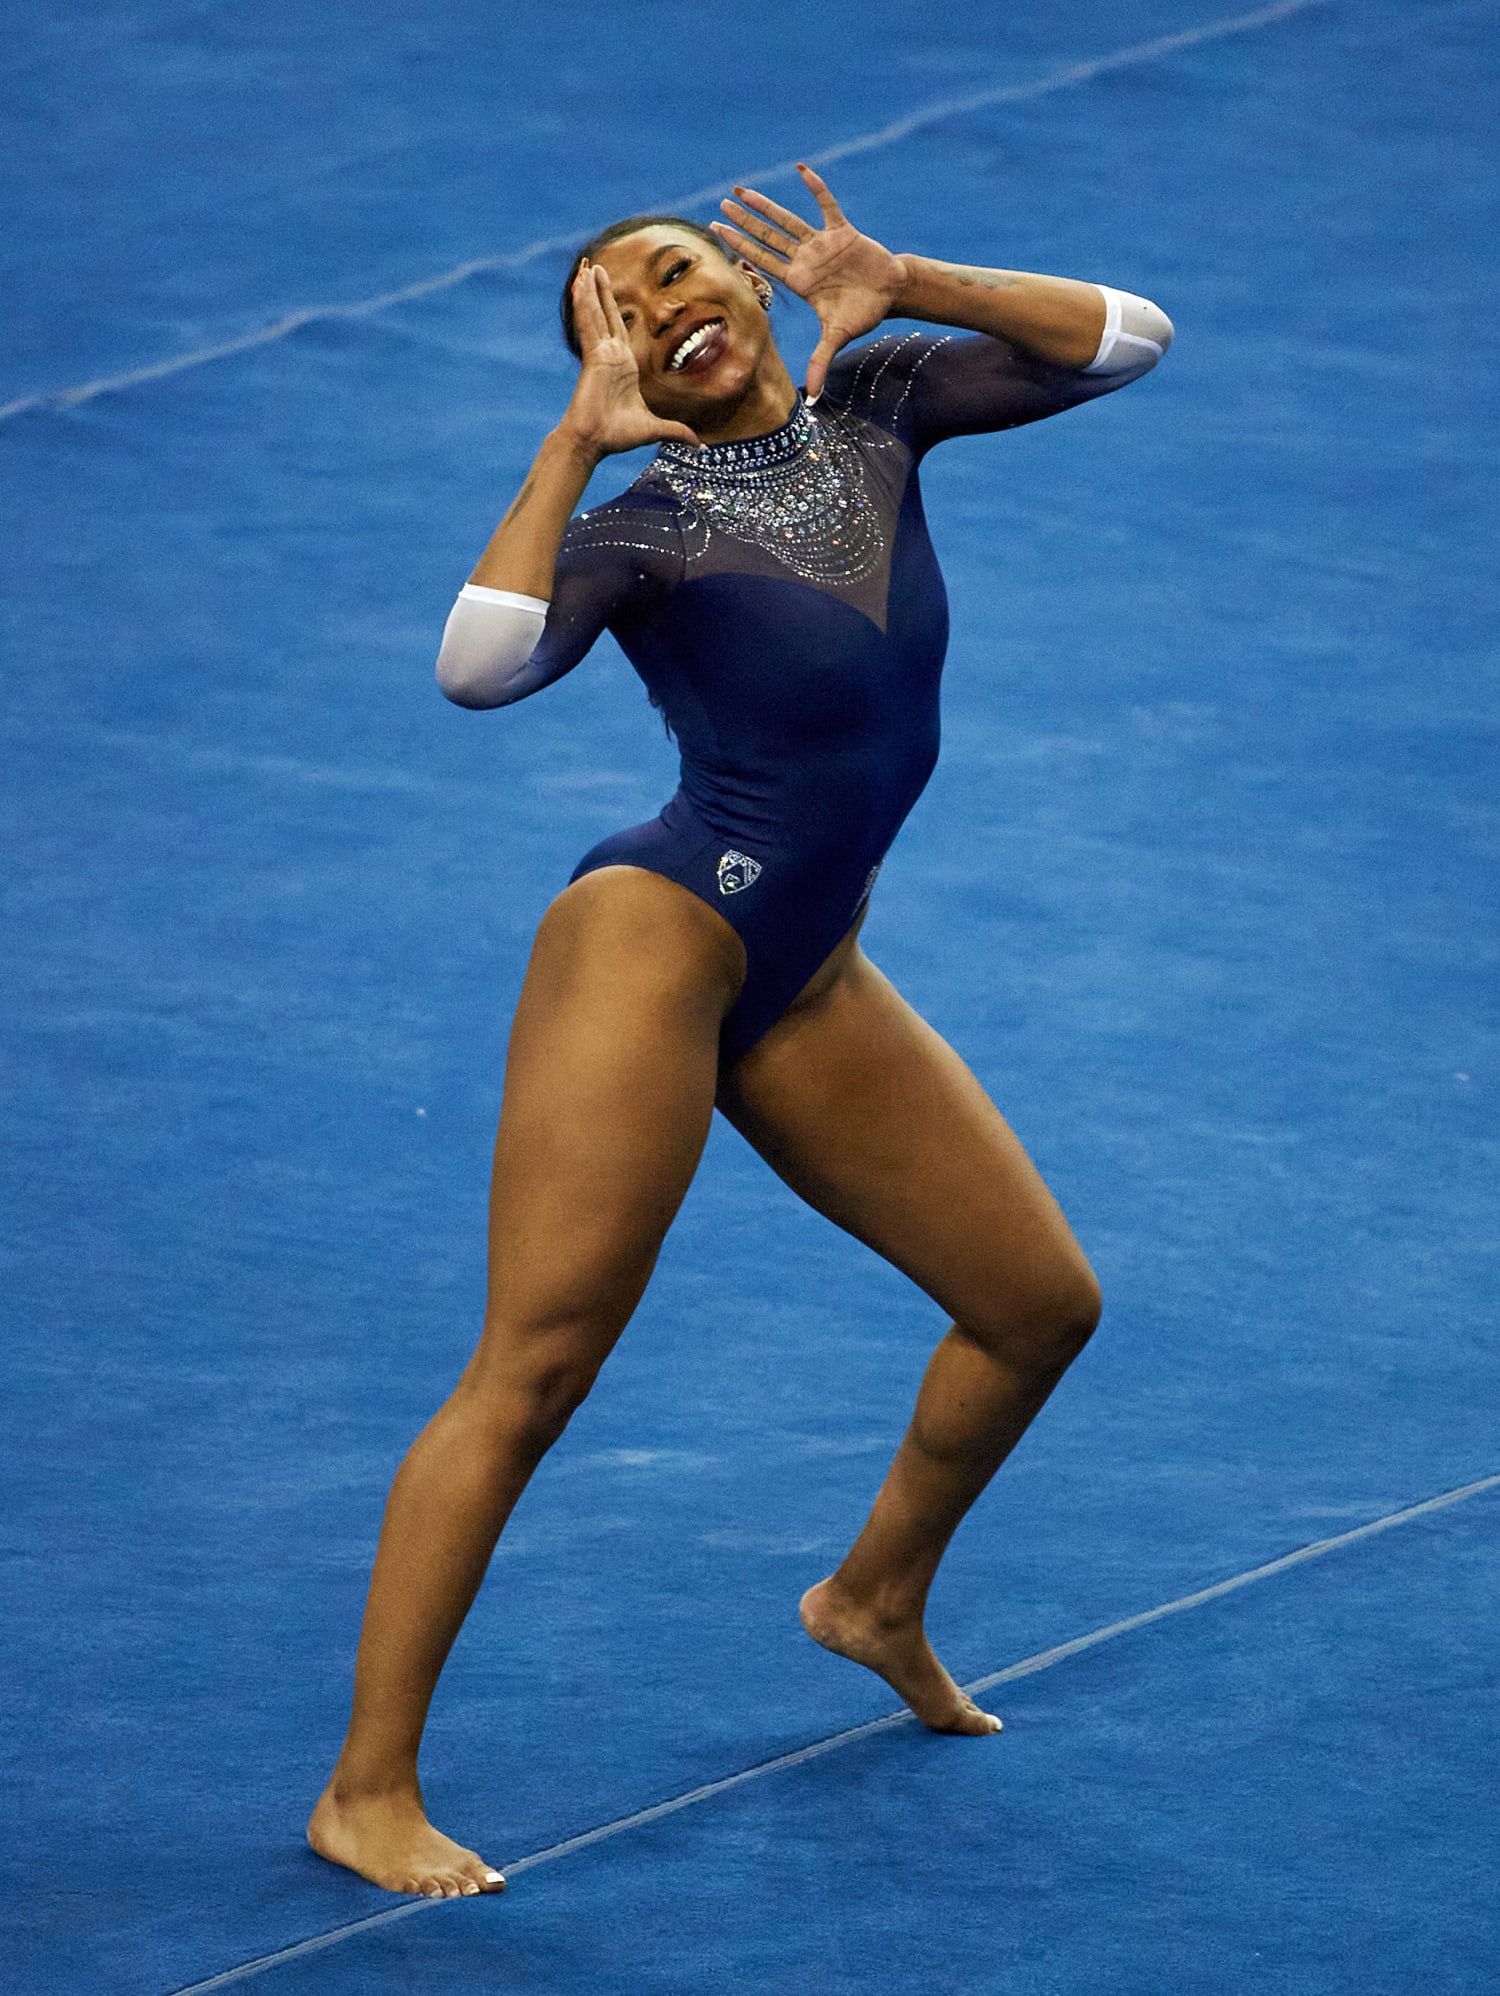 Simone Biles Becomes Most Decorated and Dominant Gymnast in the World -  Atlanta Tribune